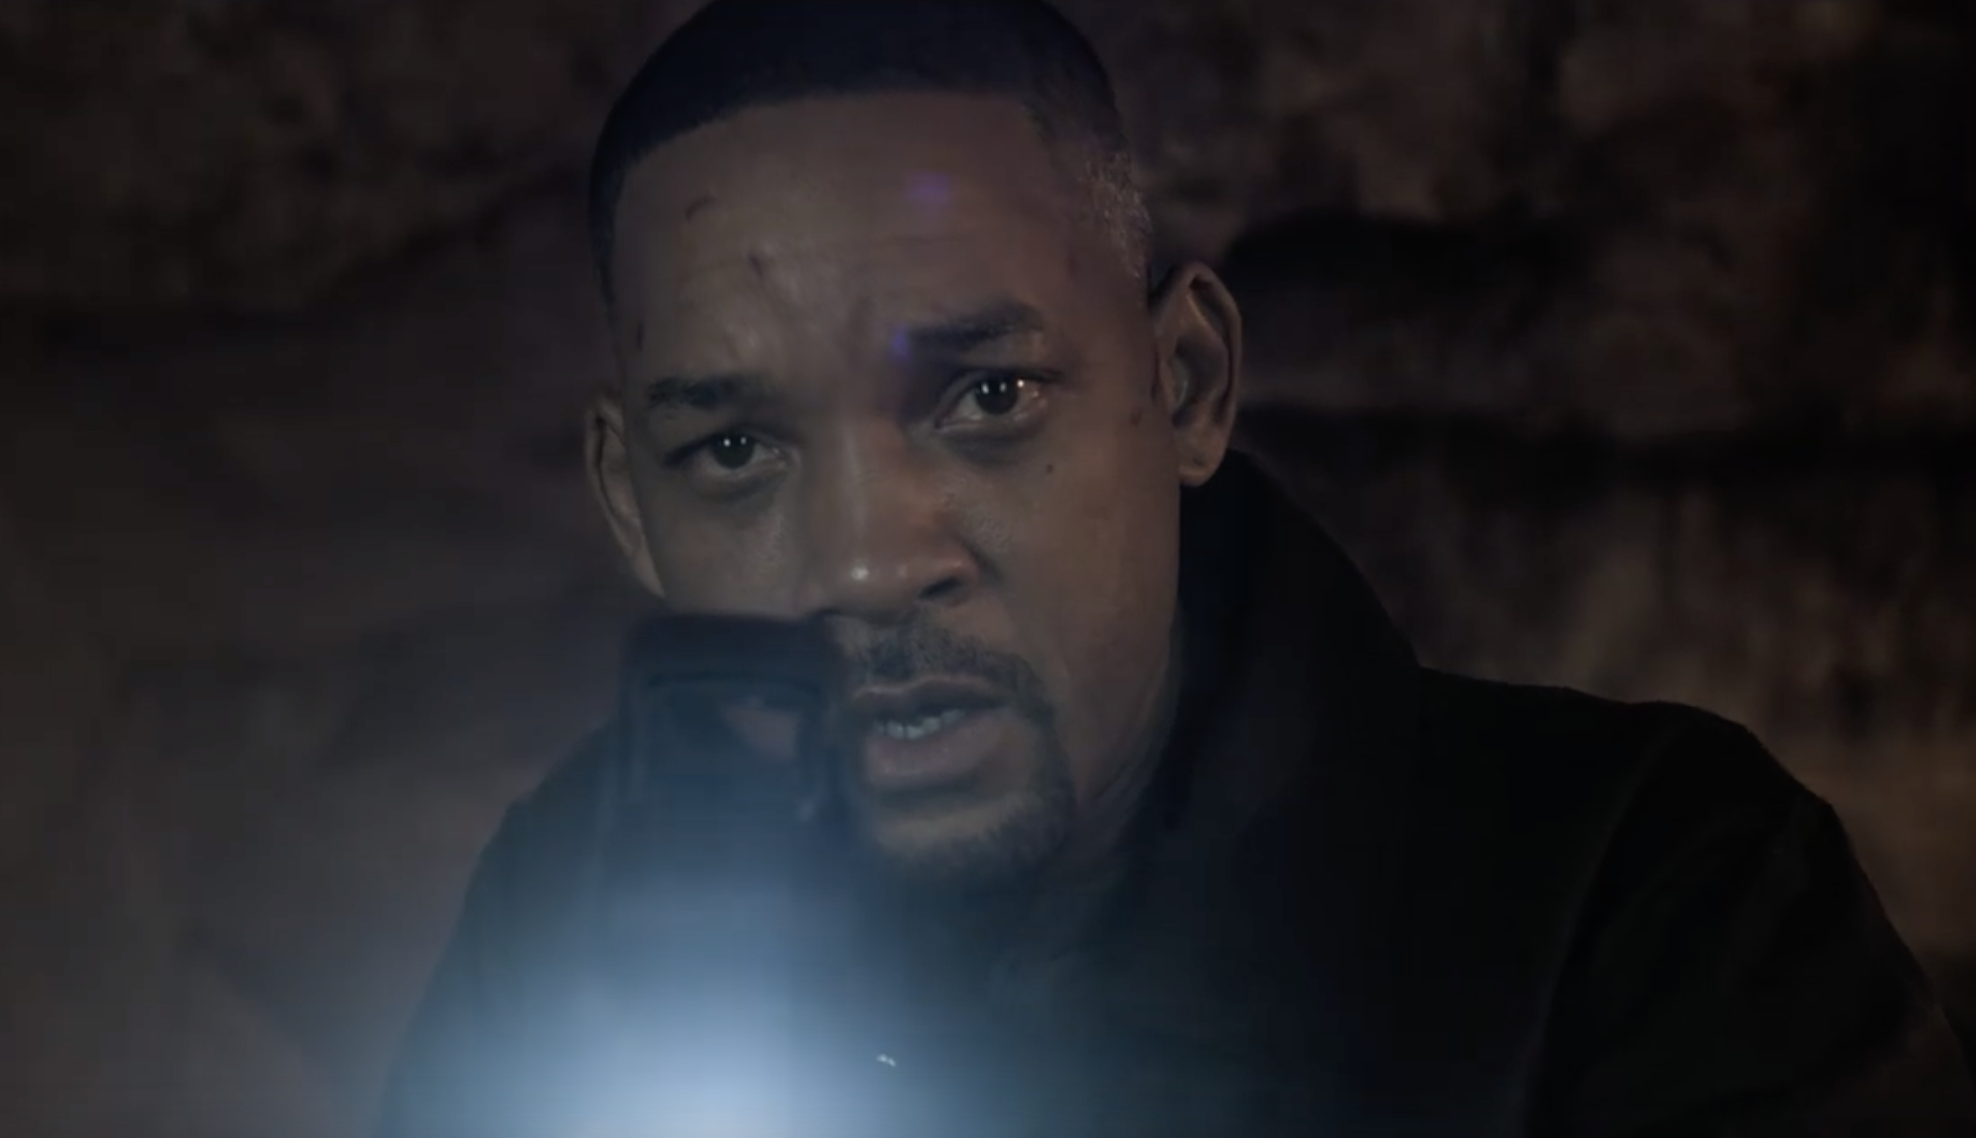 New Trailer For Ang Lee’s ‘Gemini Man’ Starring Will Smith